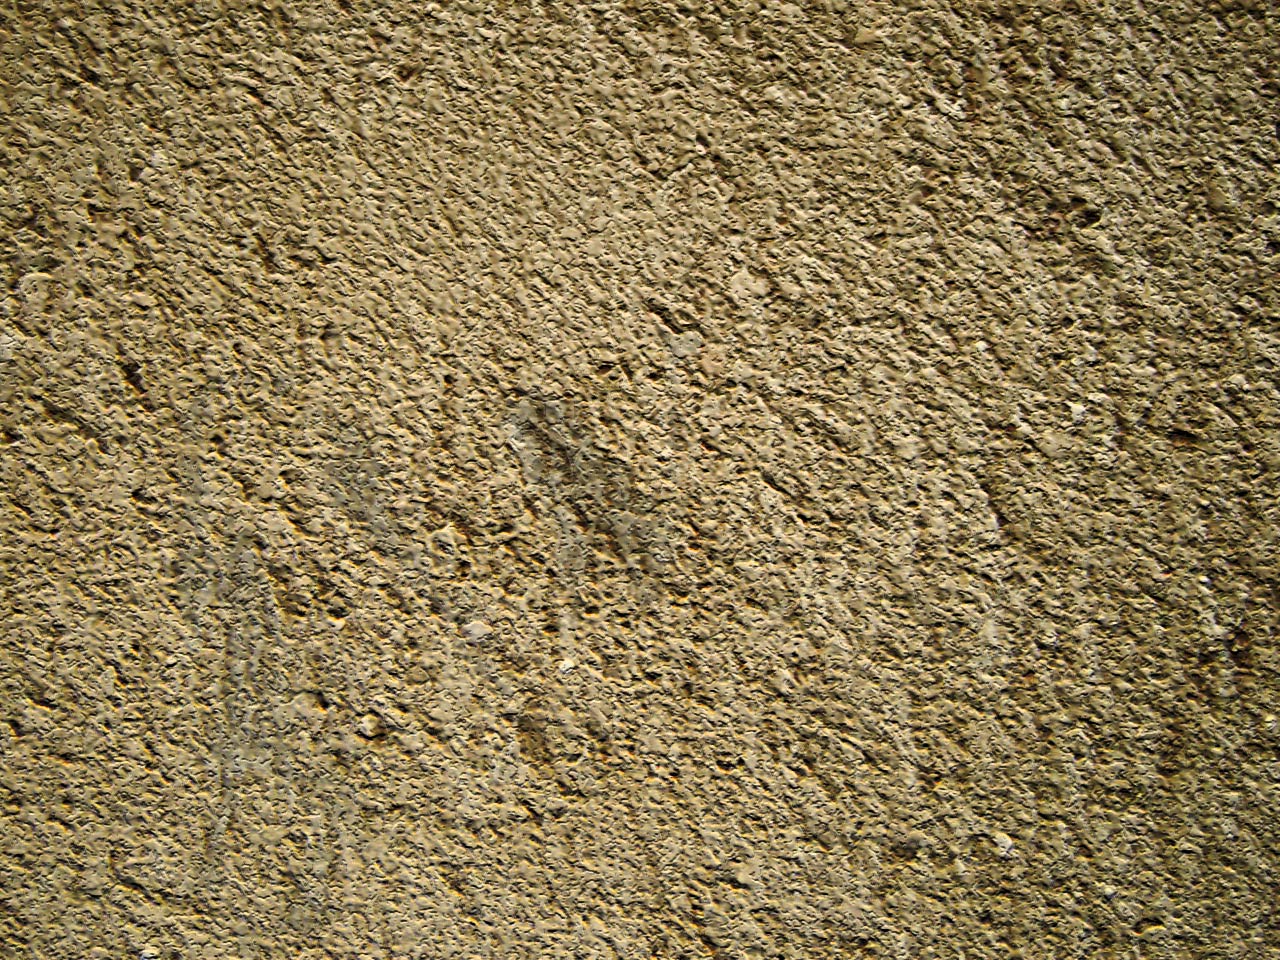 a brown surface of cement is shown with a small animal drawn on the concrete